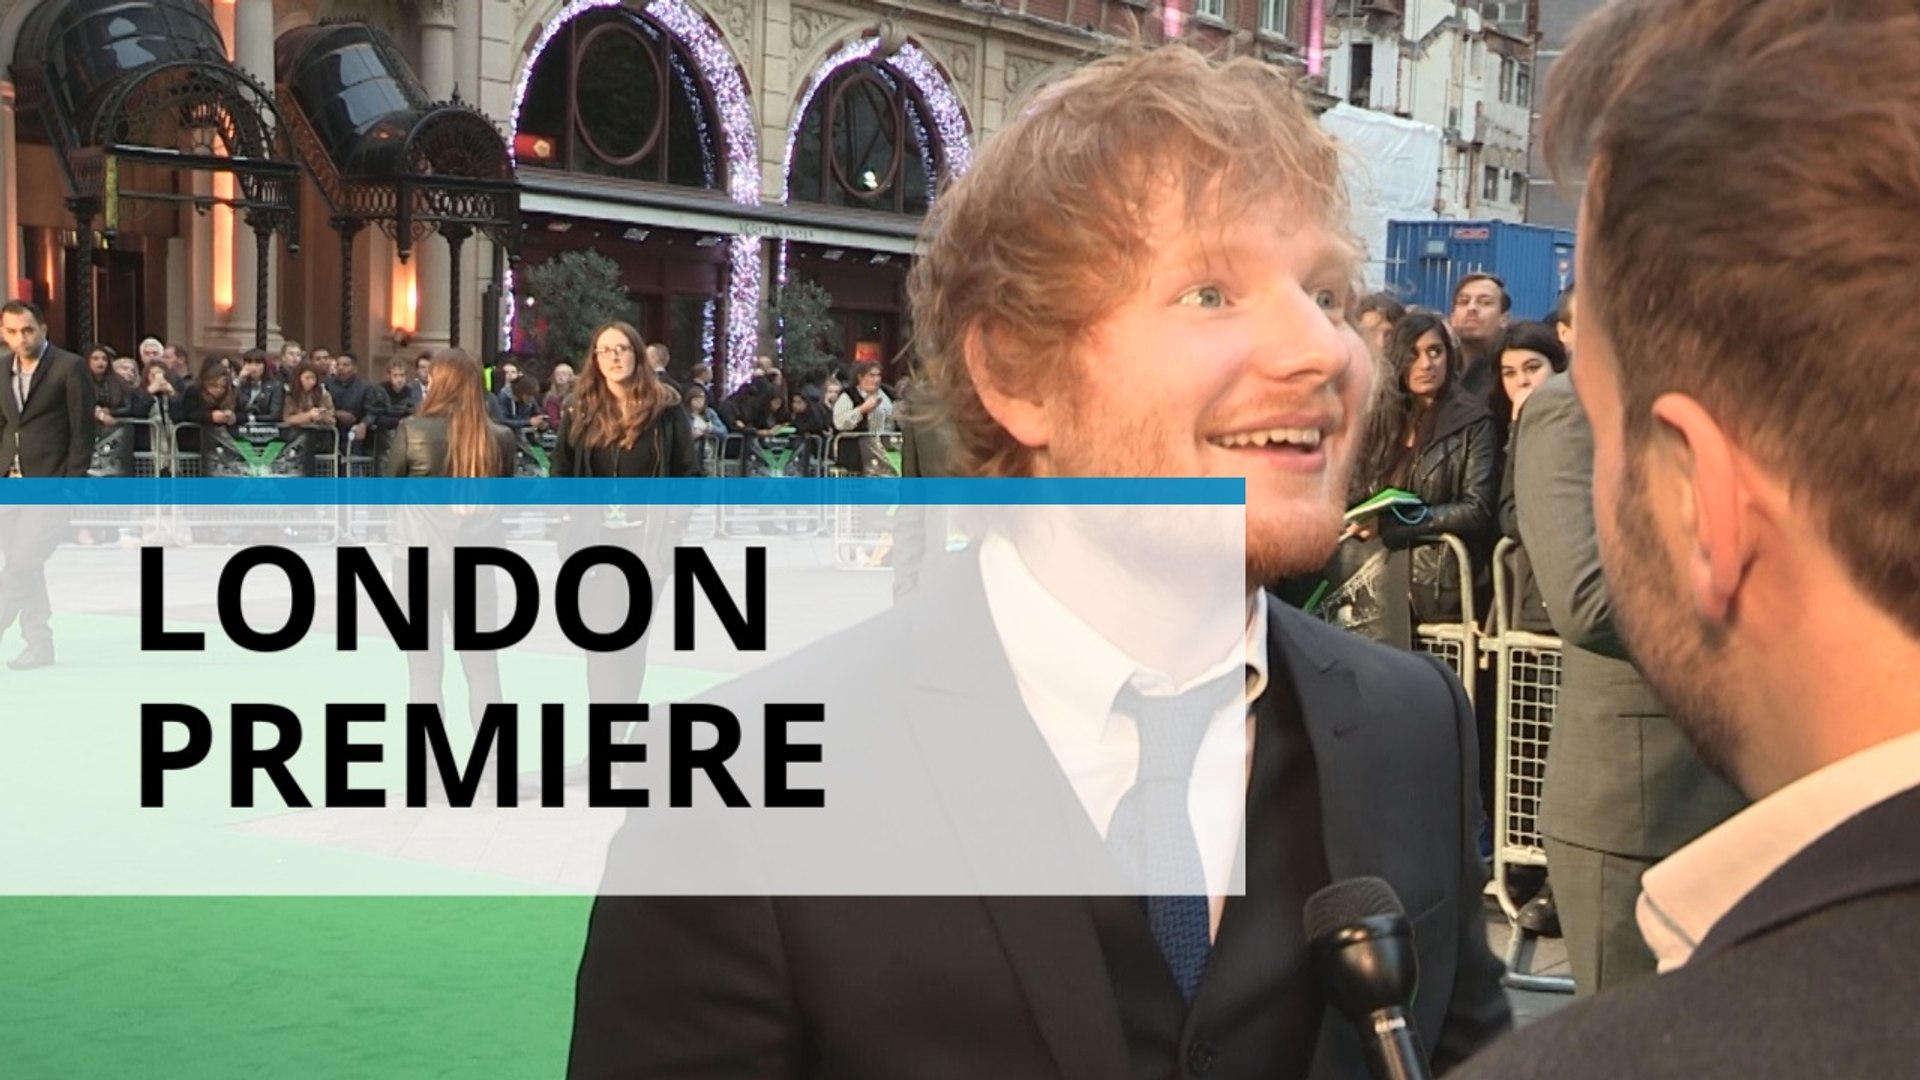 Ed Sheeran releases his first documentary